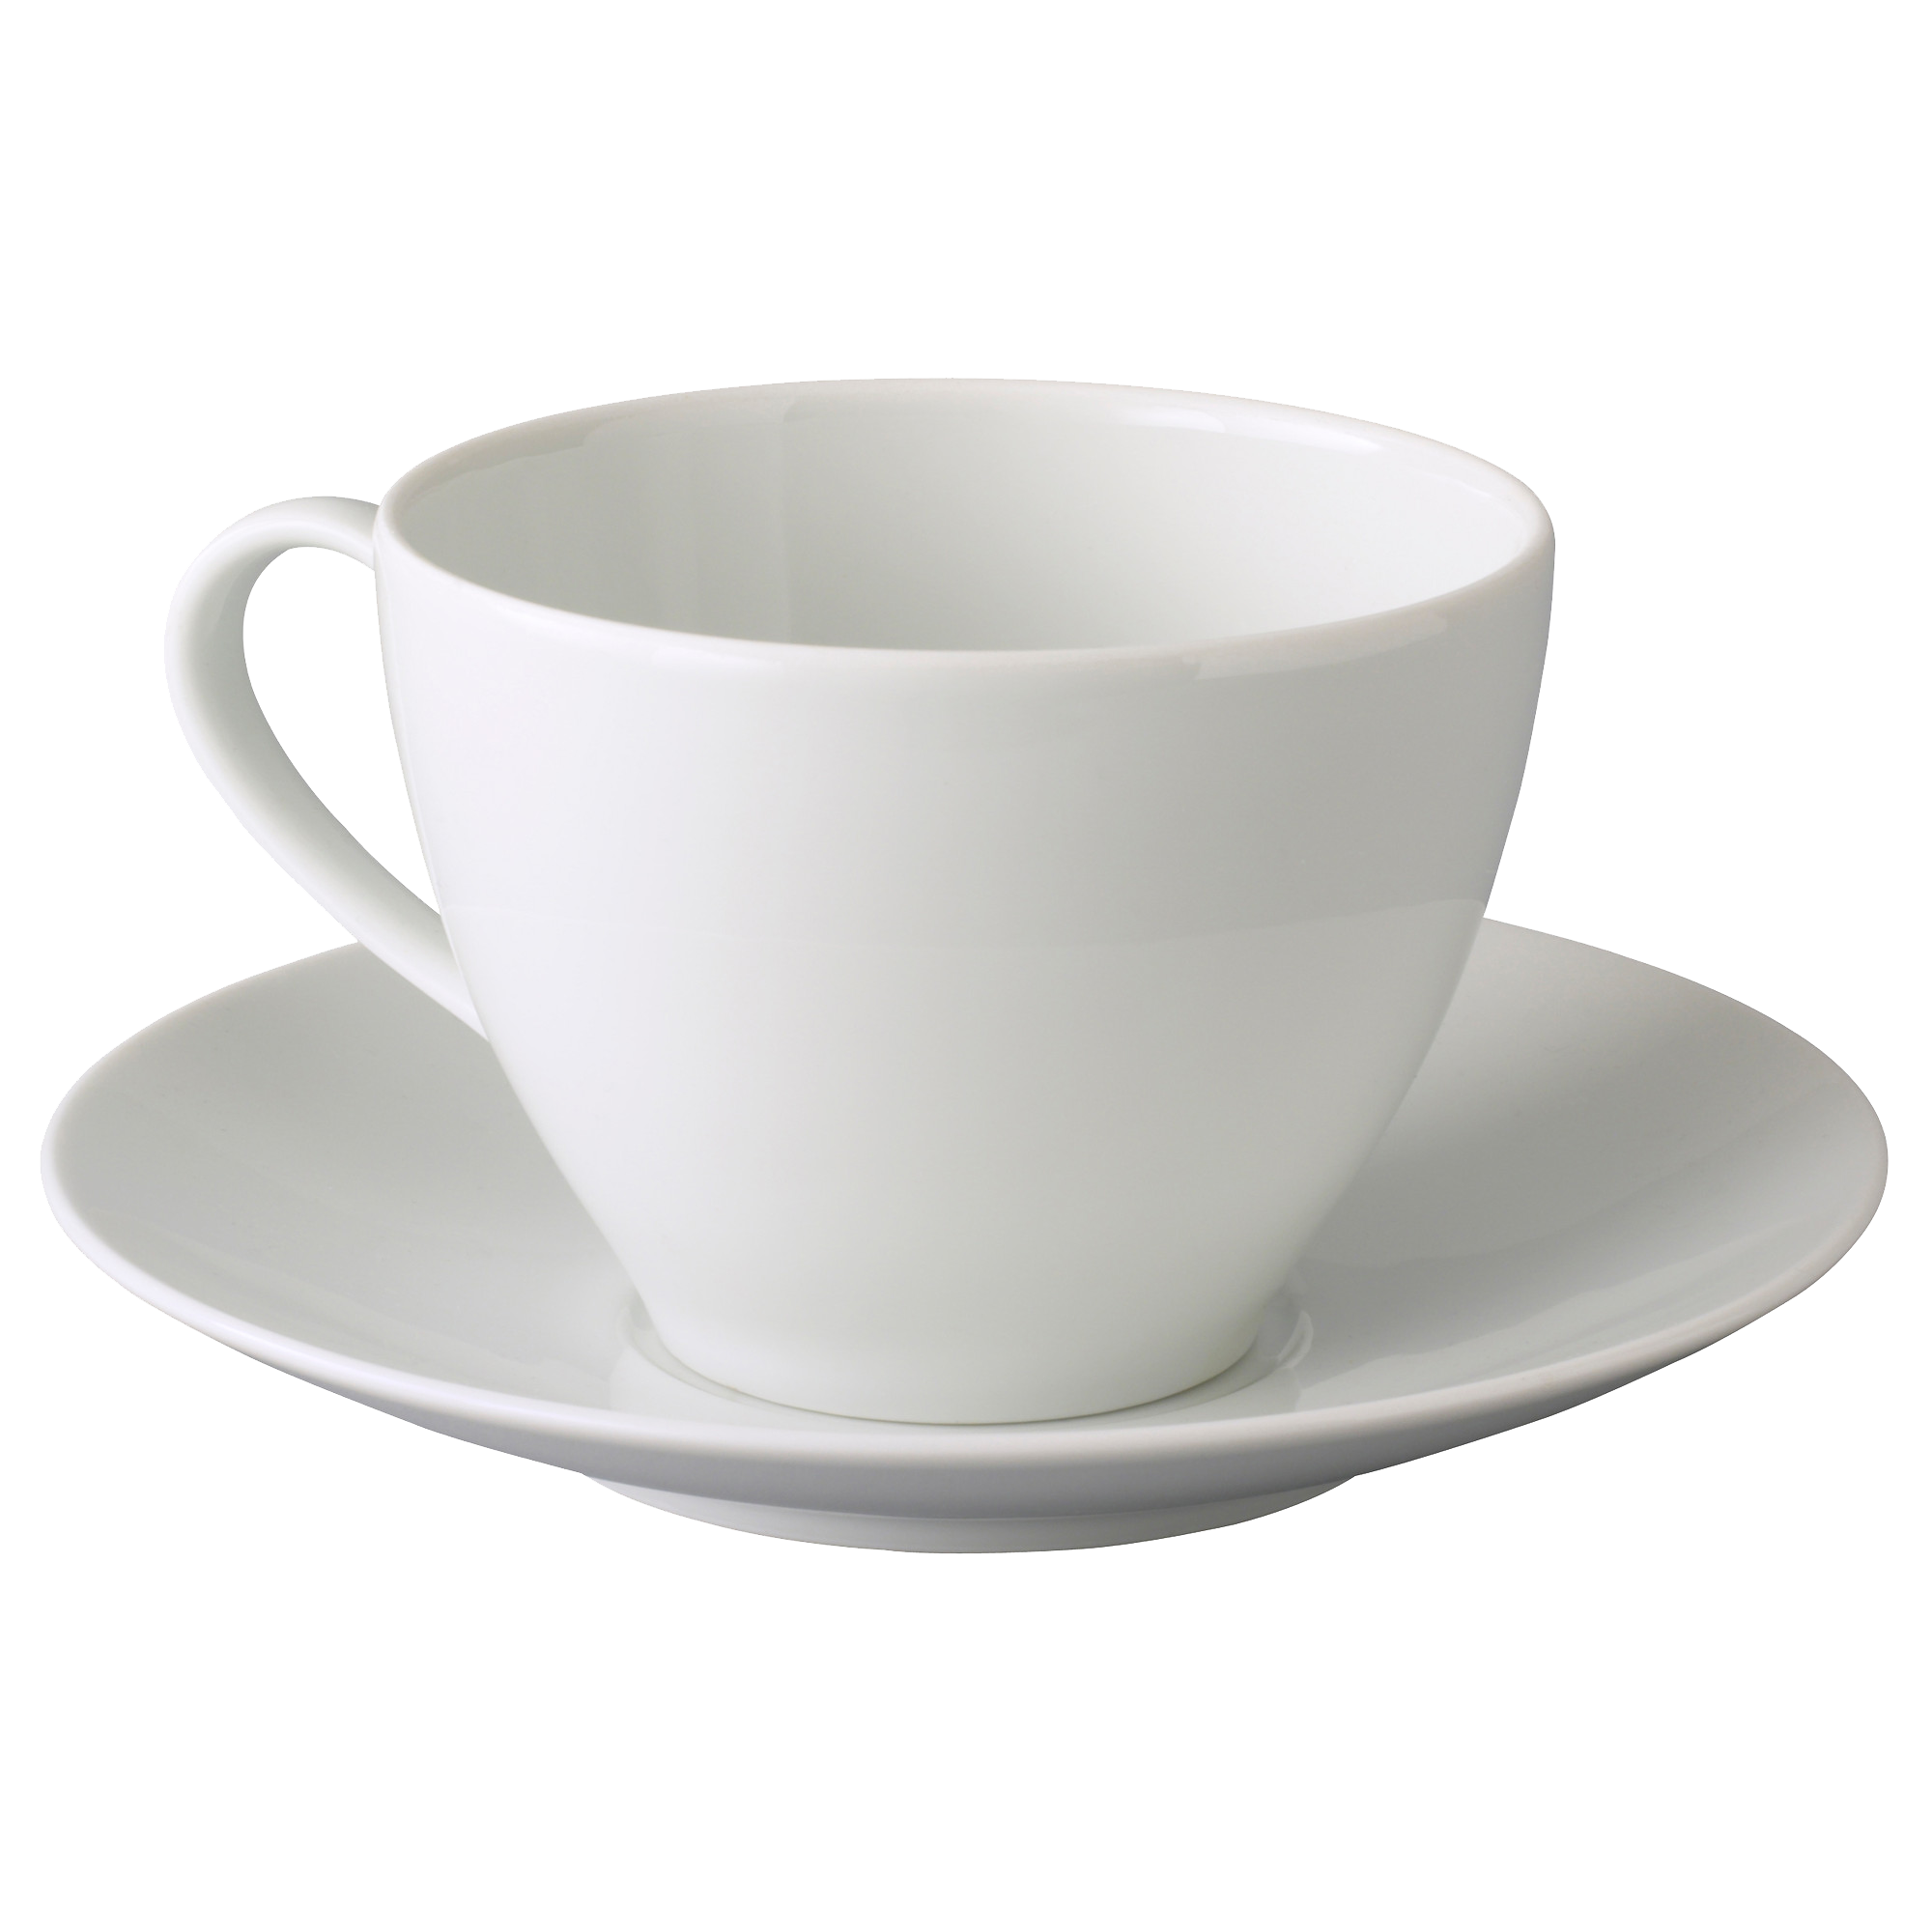 Tea Cup File PNG Image